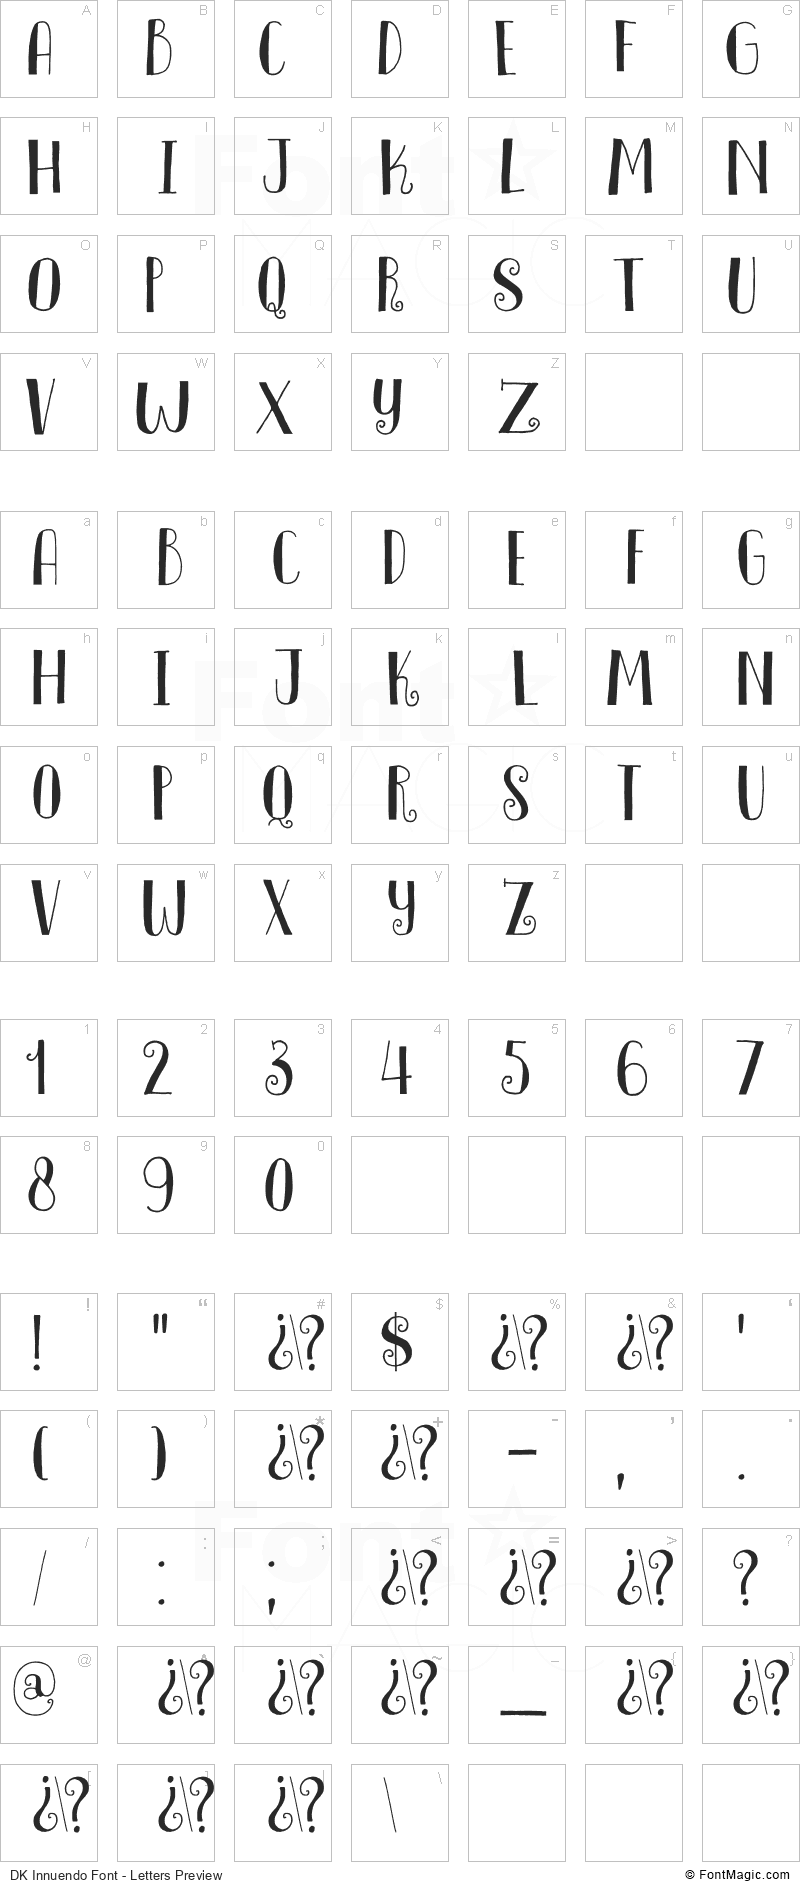 DK Innuendo Font - All Latters Preview Chart